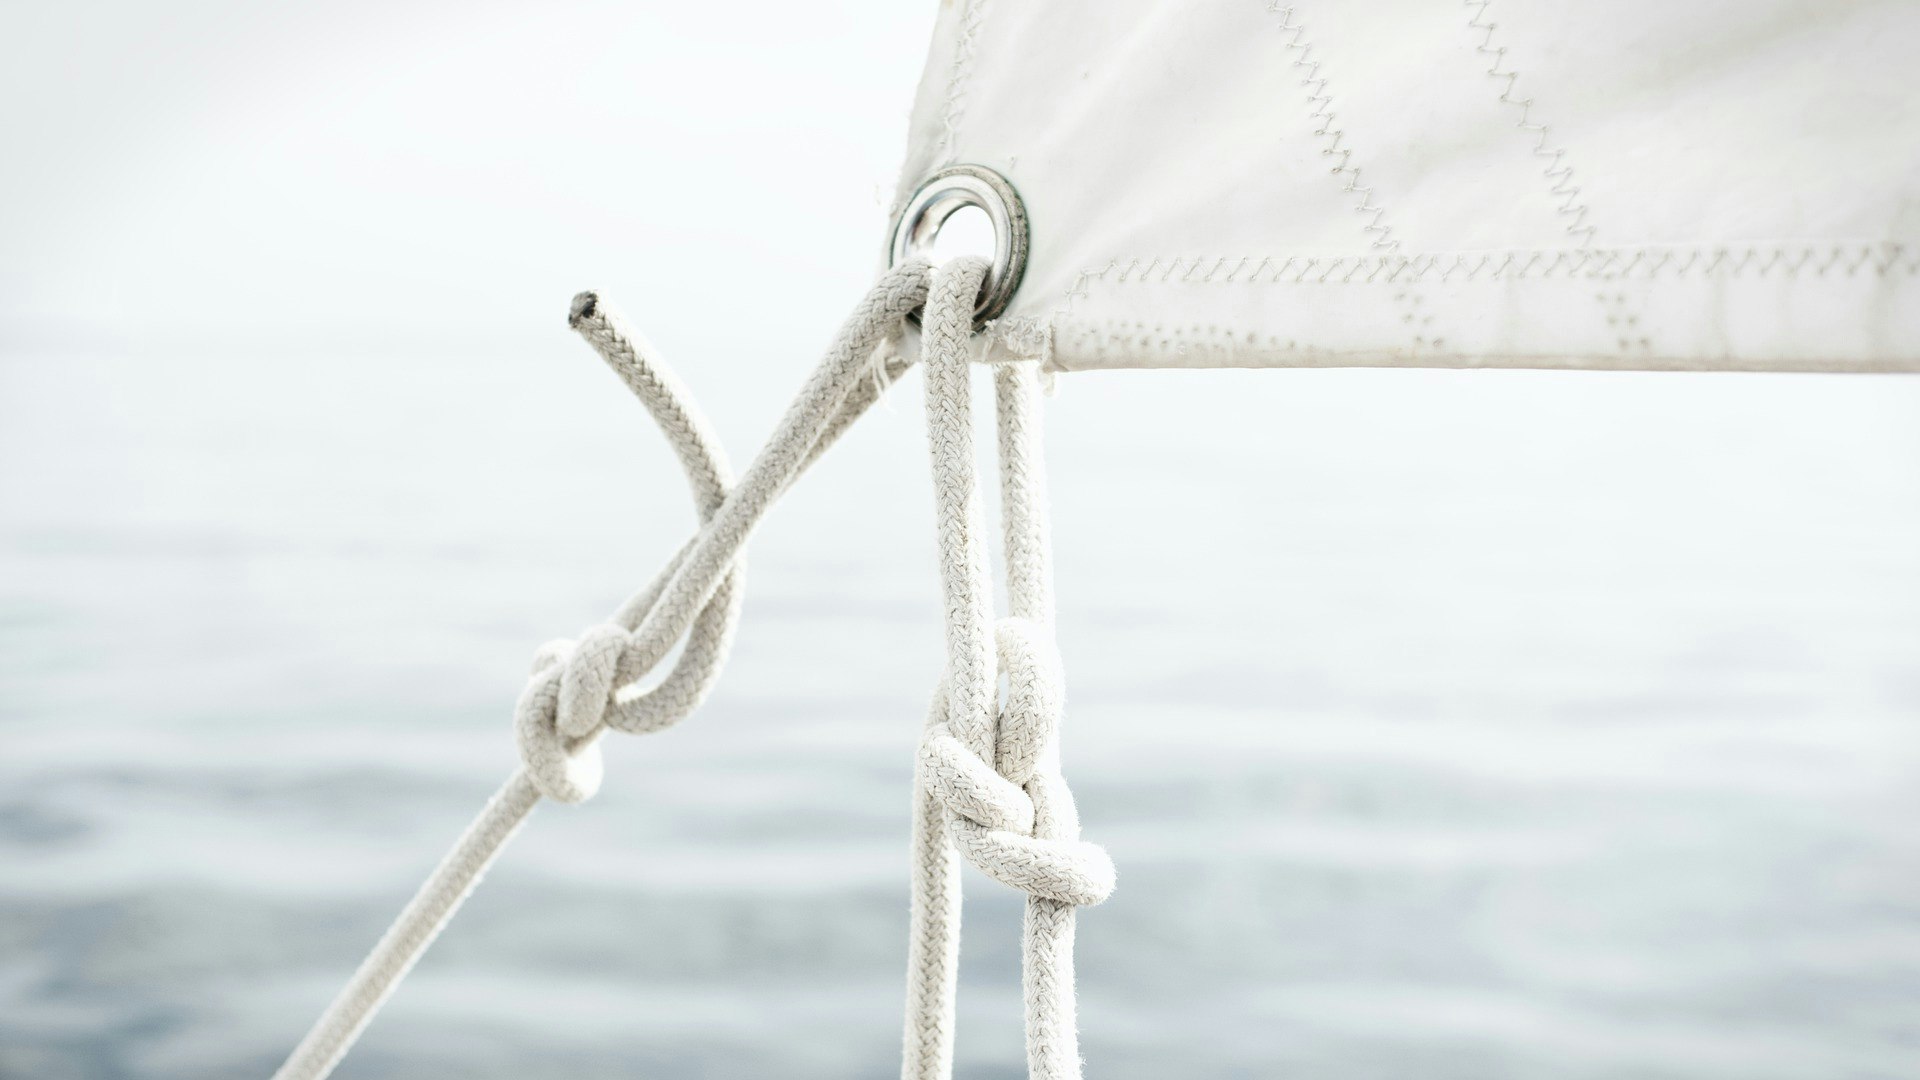 Sailors have several reliable knots at their disposal 